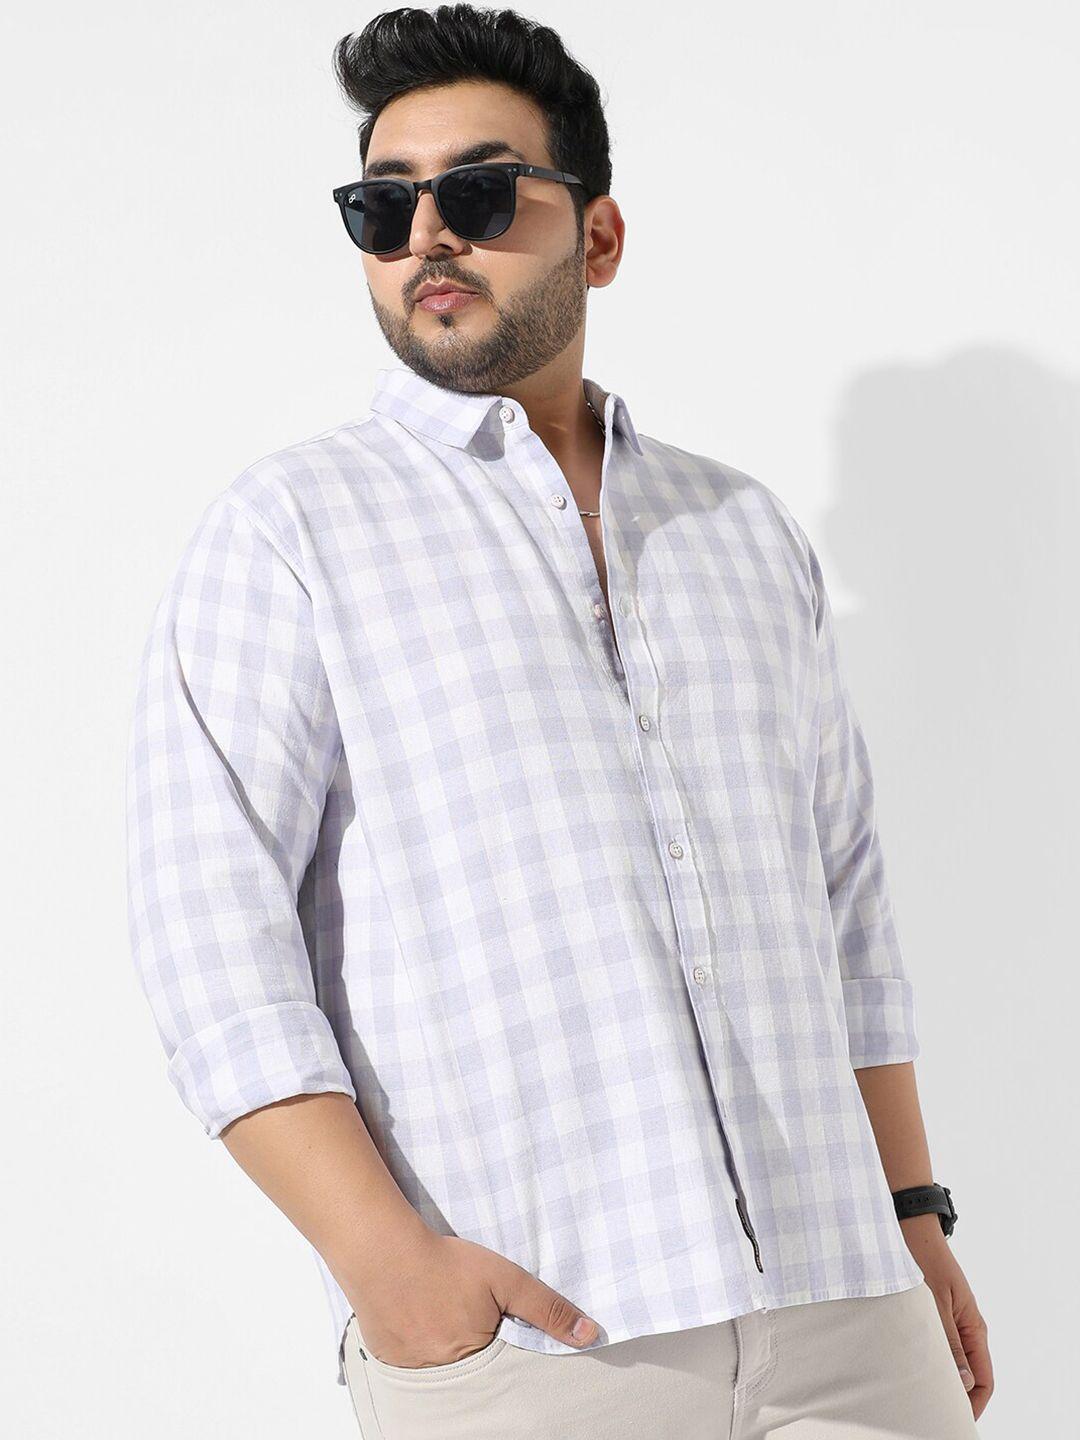 instafab-plus-plus-size-other-checks-spread-collar-cotton-casual-shirt